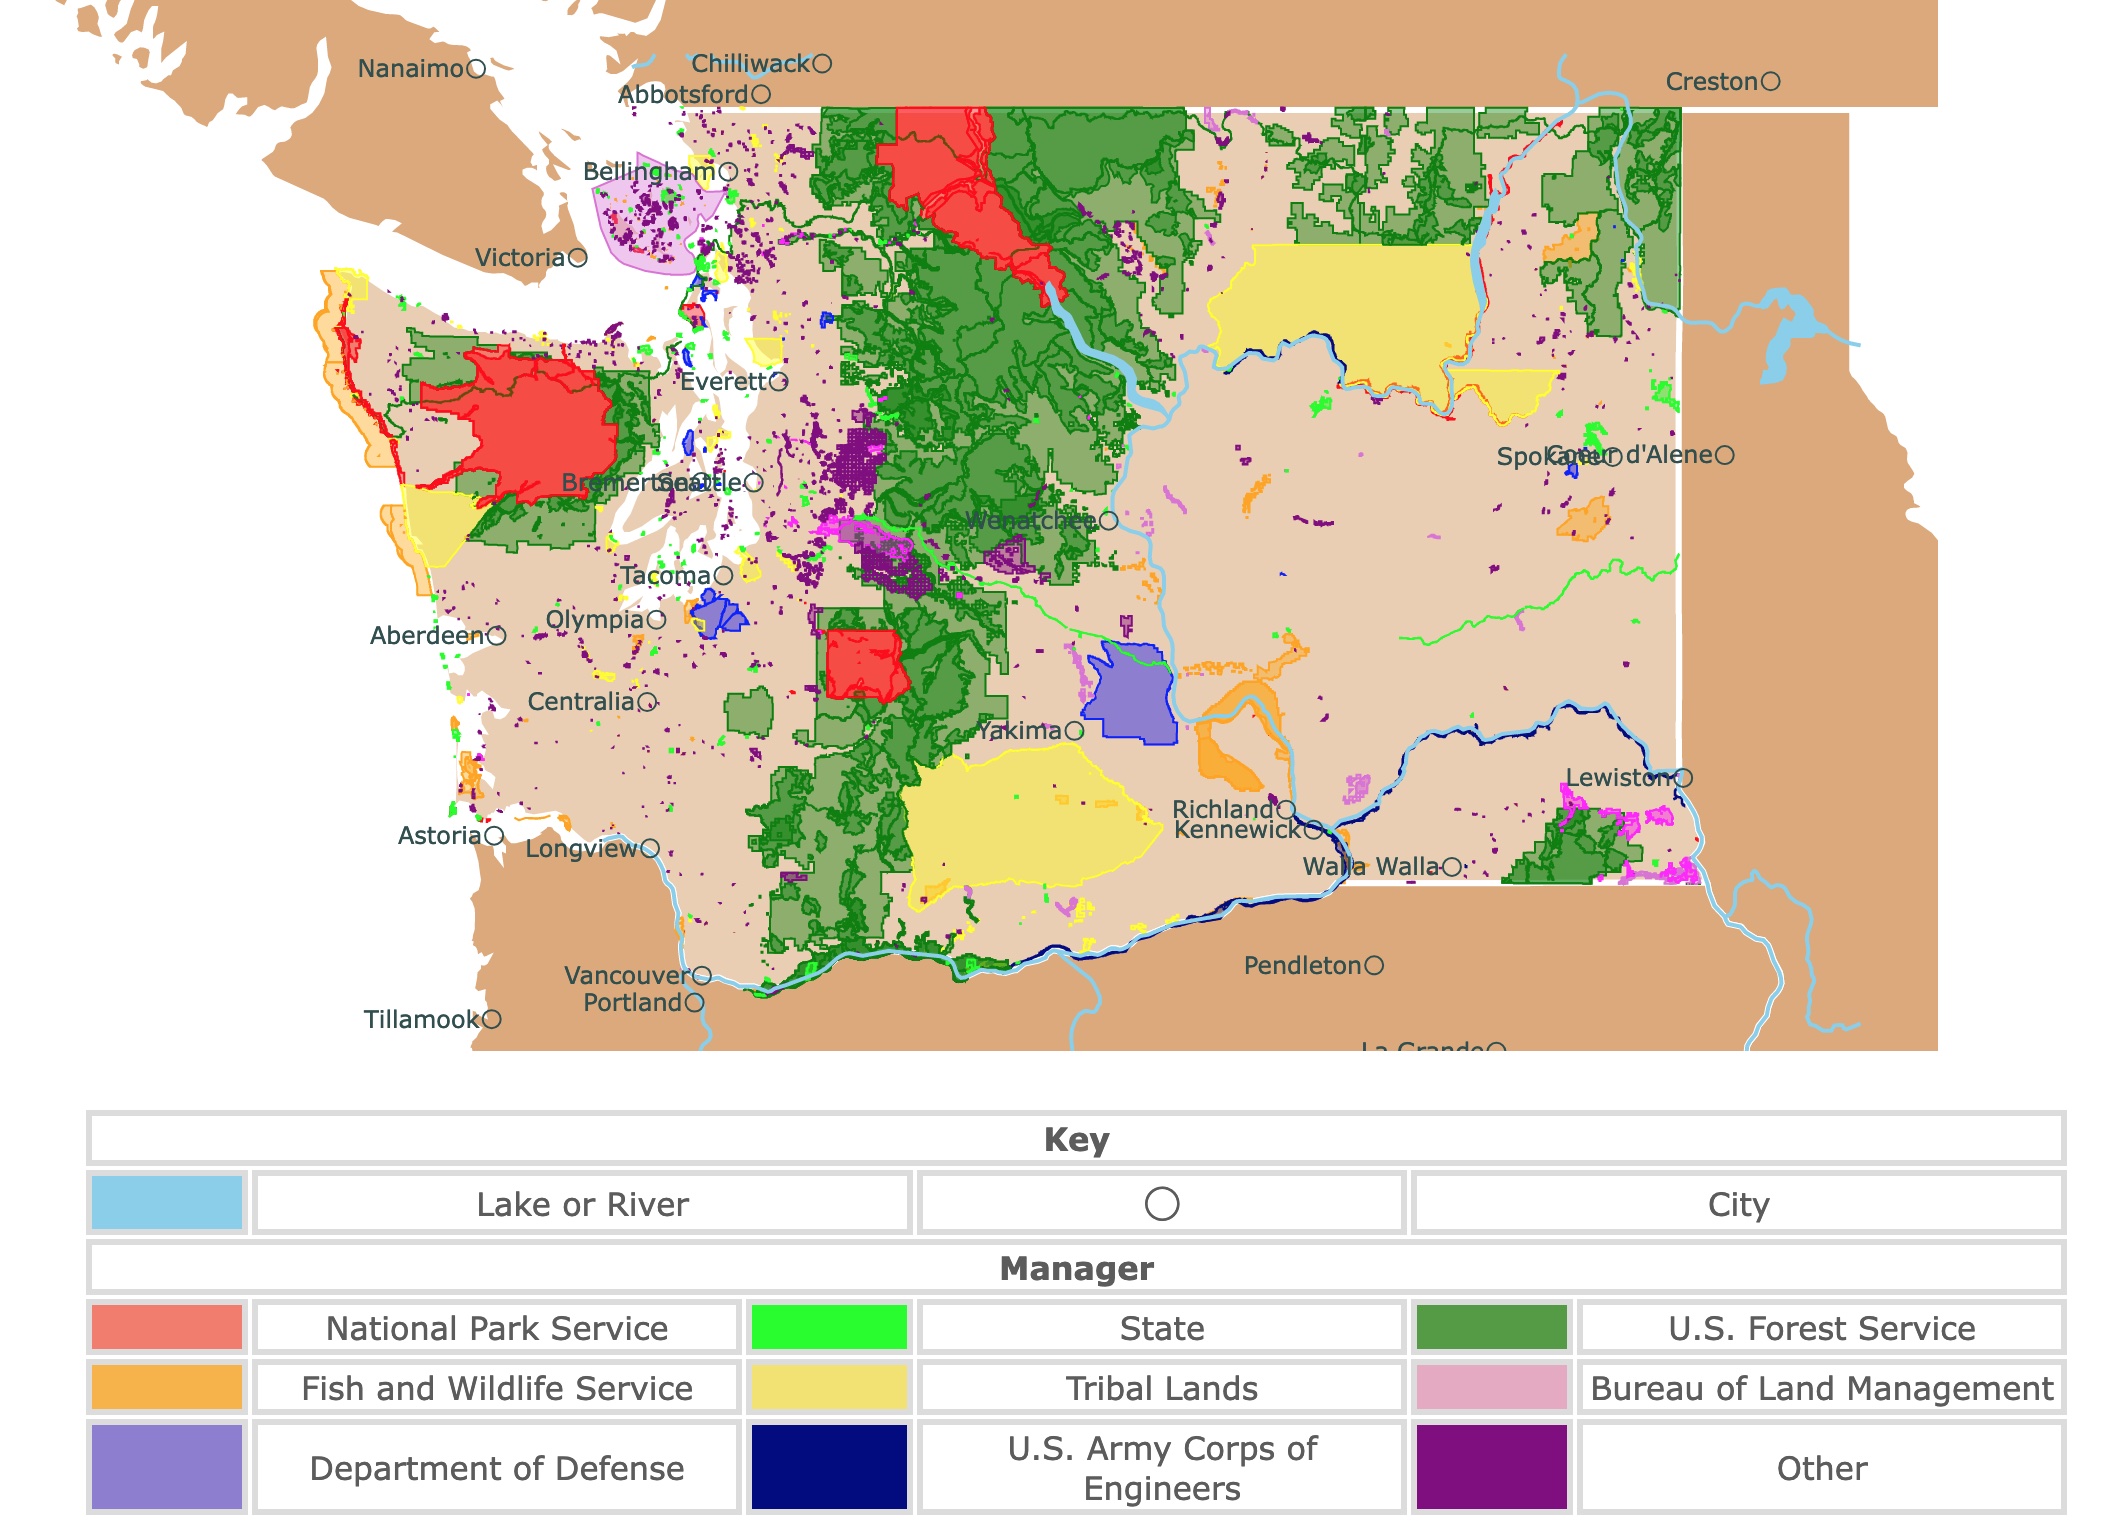 Map of Washington's state parks, national parks, forests, and public lands areas